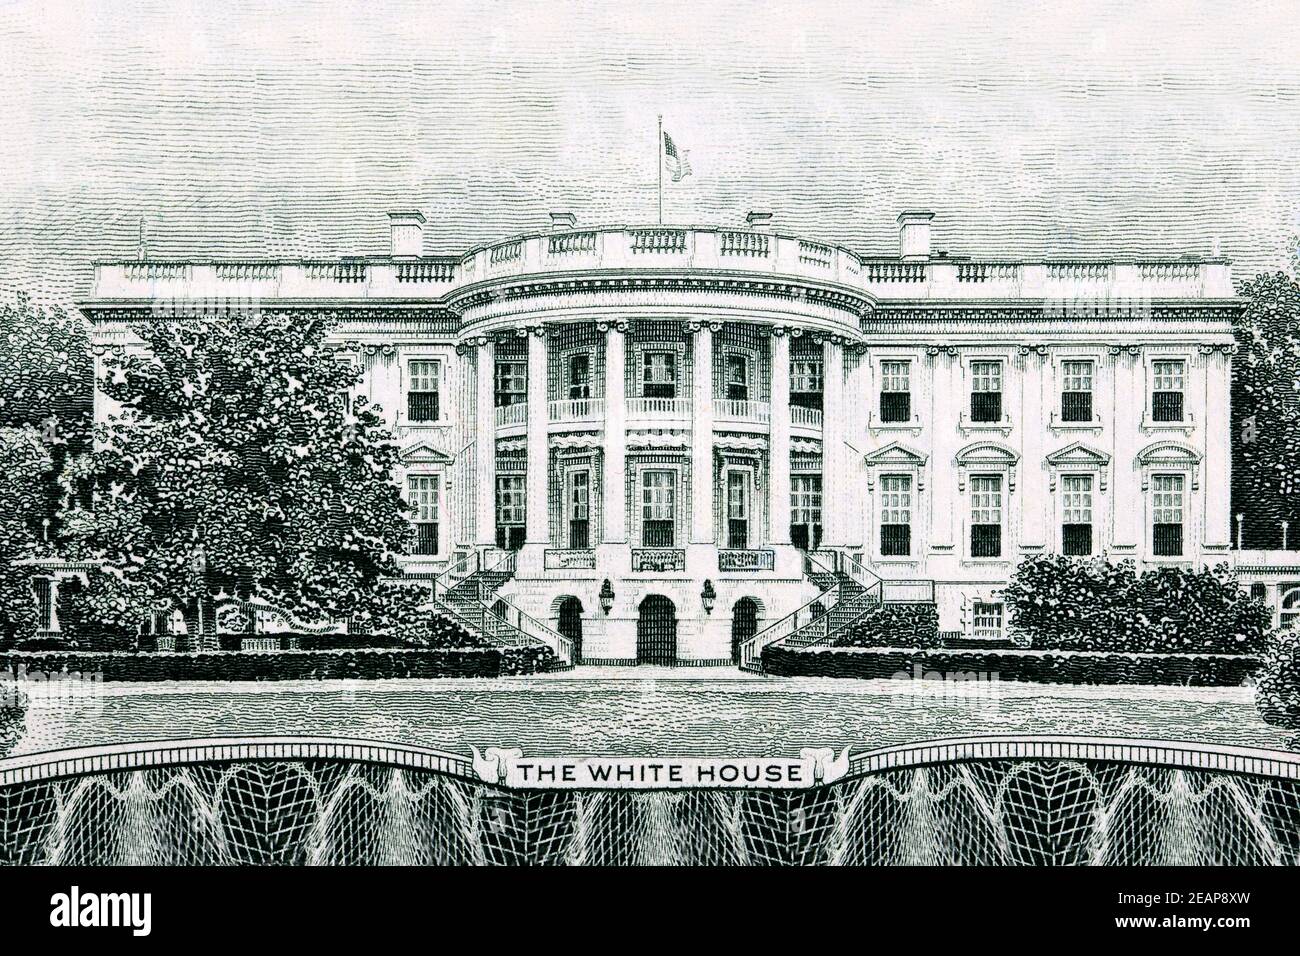 The White House from old American dollars Stock Photo